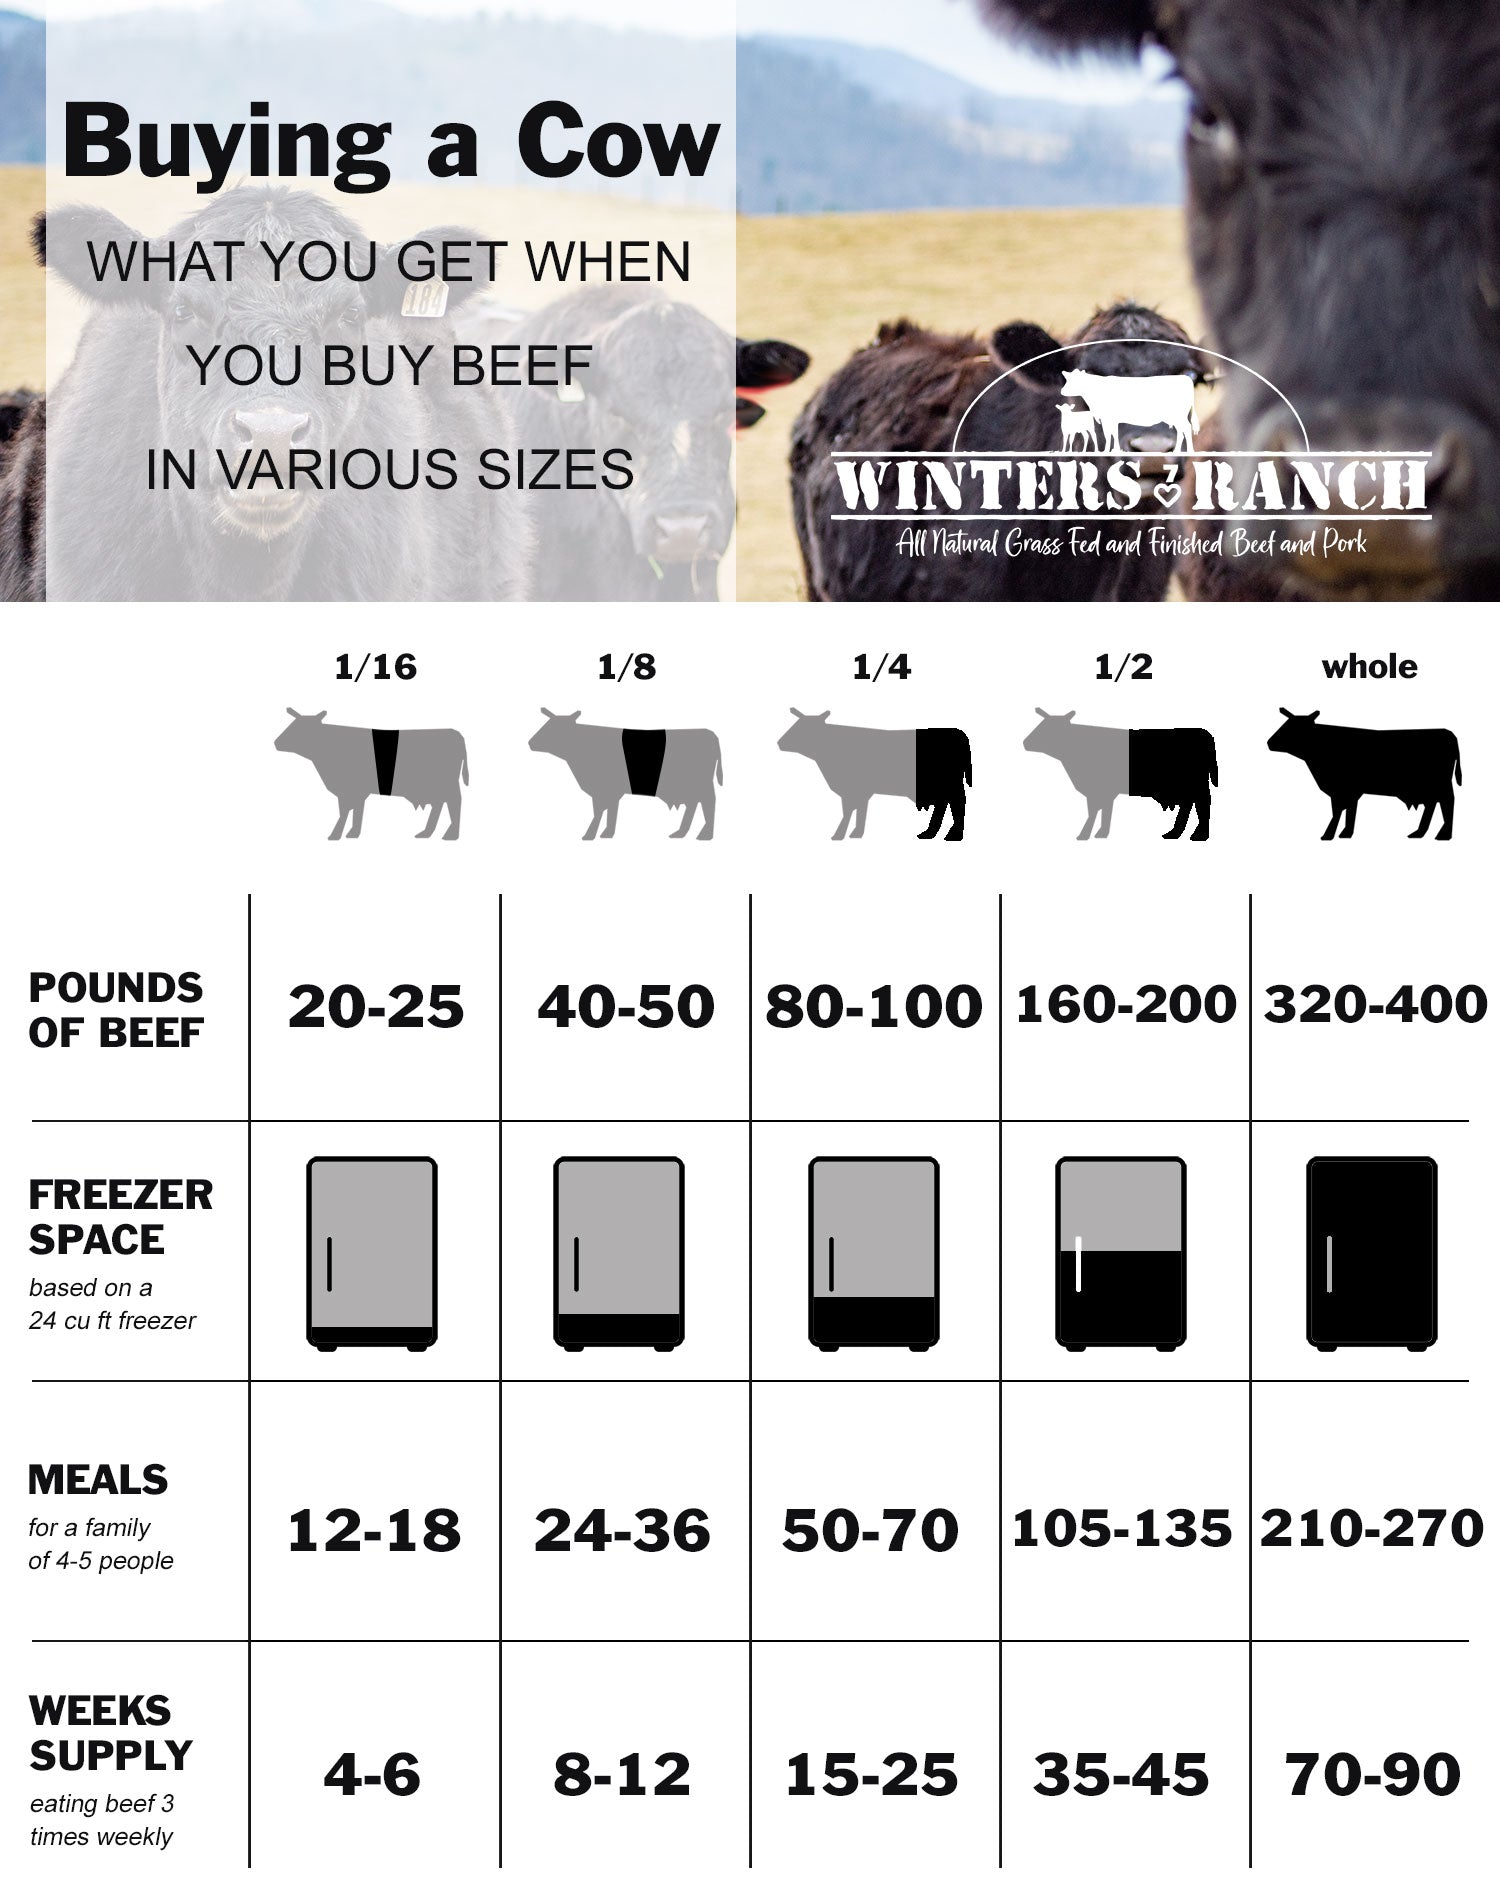 image that shows how much beef purchasing a whole cow or portions of a whole cow will give you